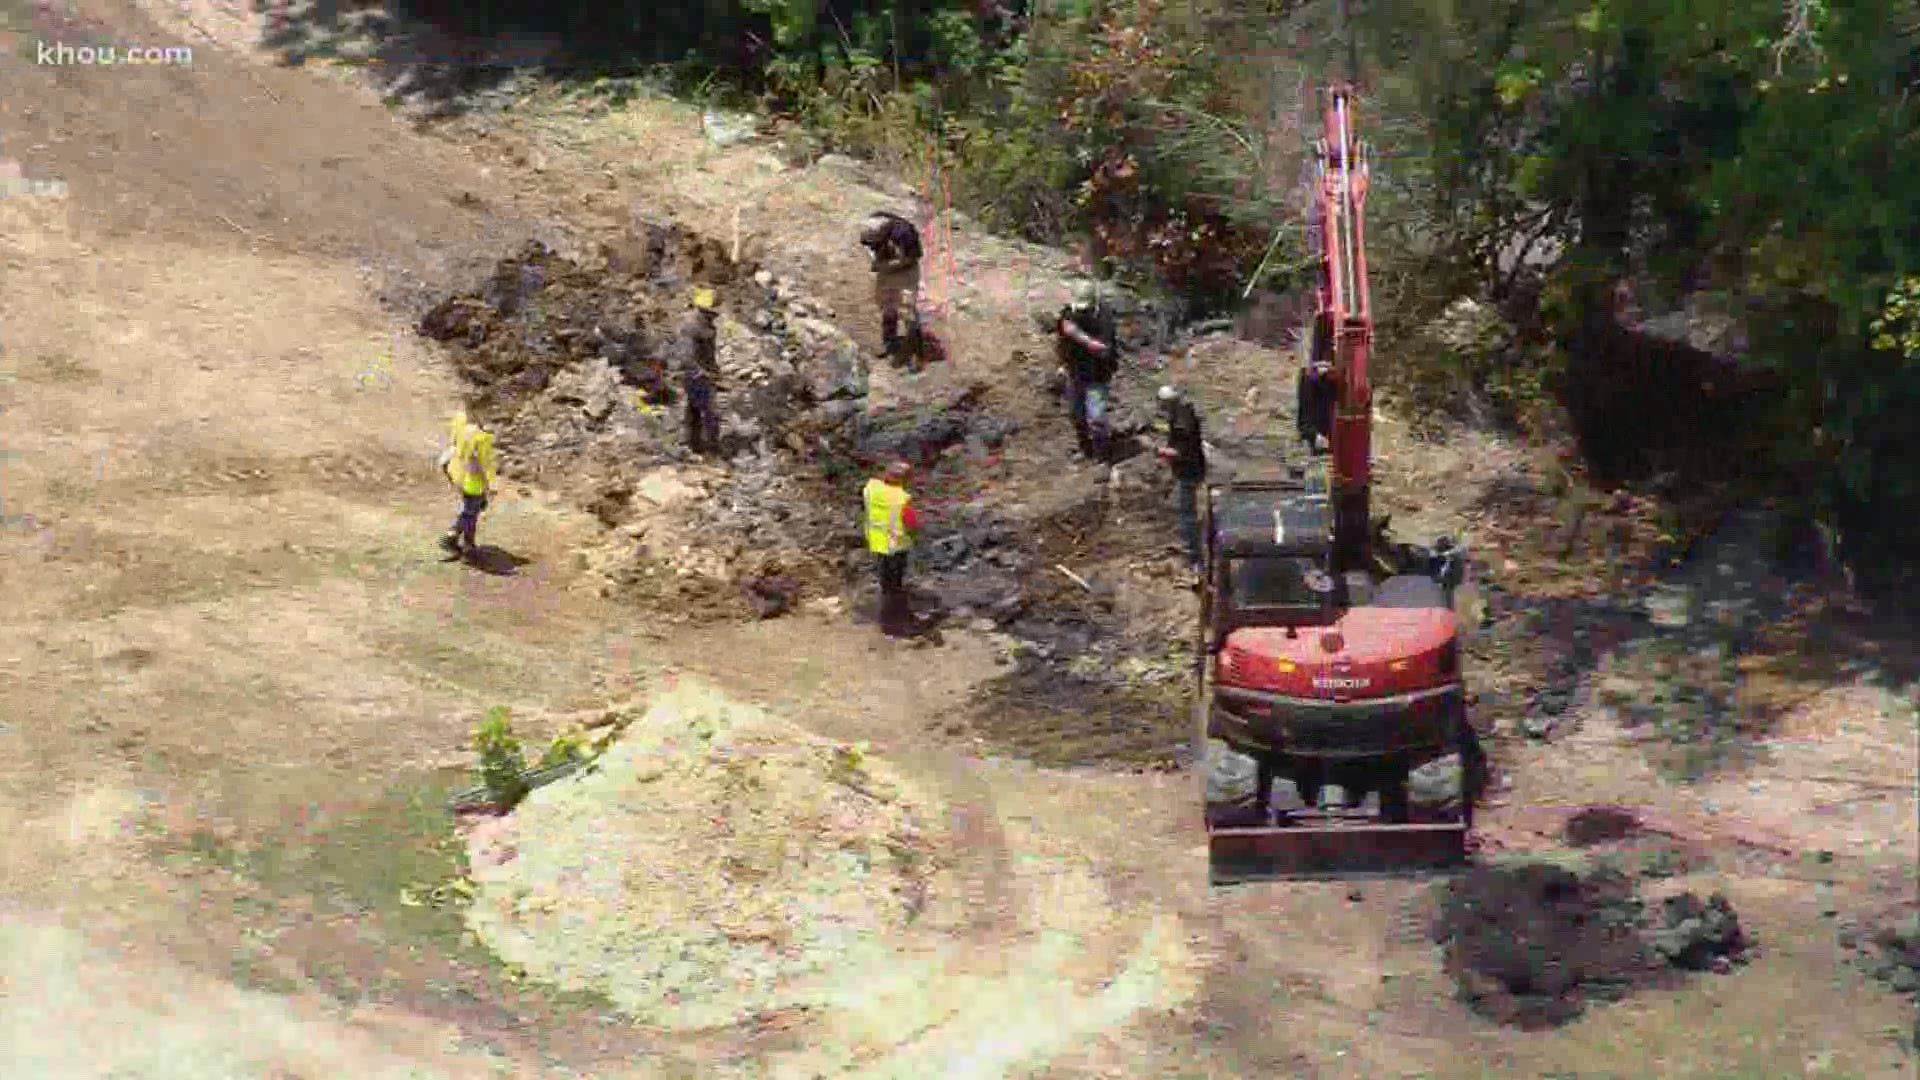 Officials were in the Crosby area Friday where deputies said thousands of gallons of oil have been illegally buried.